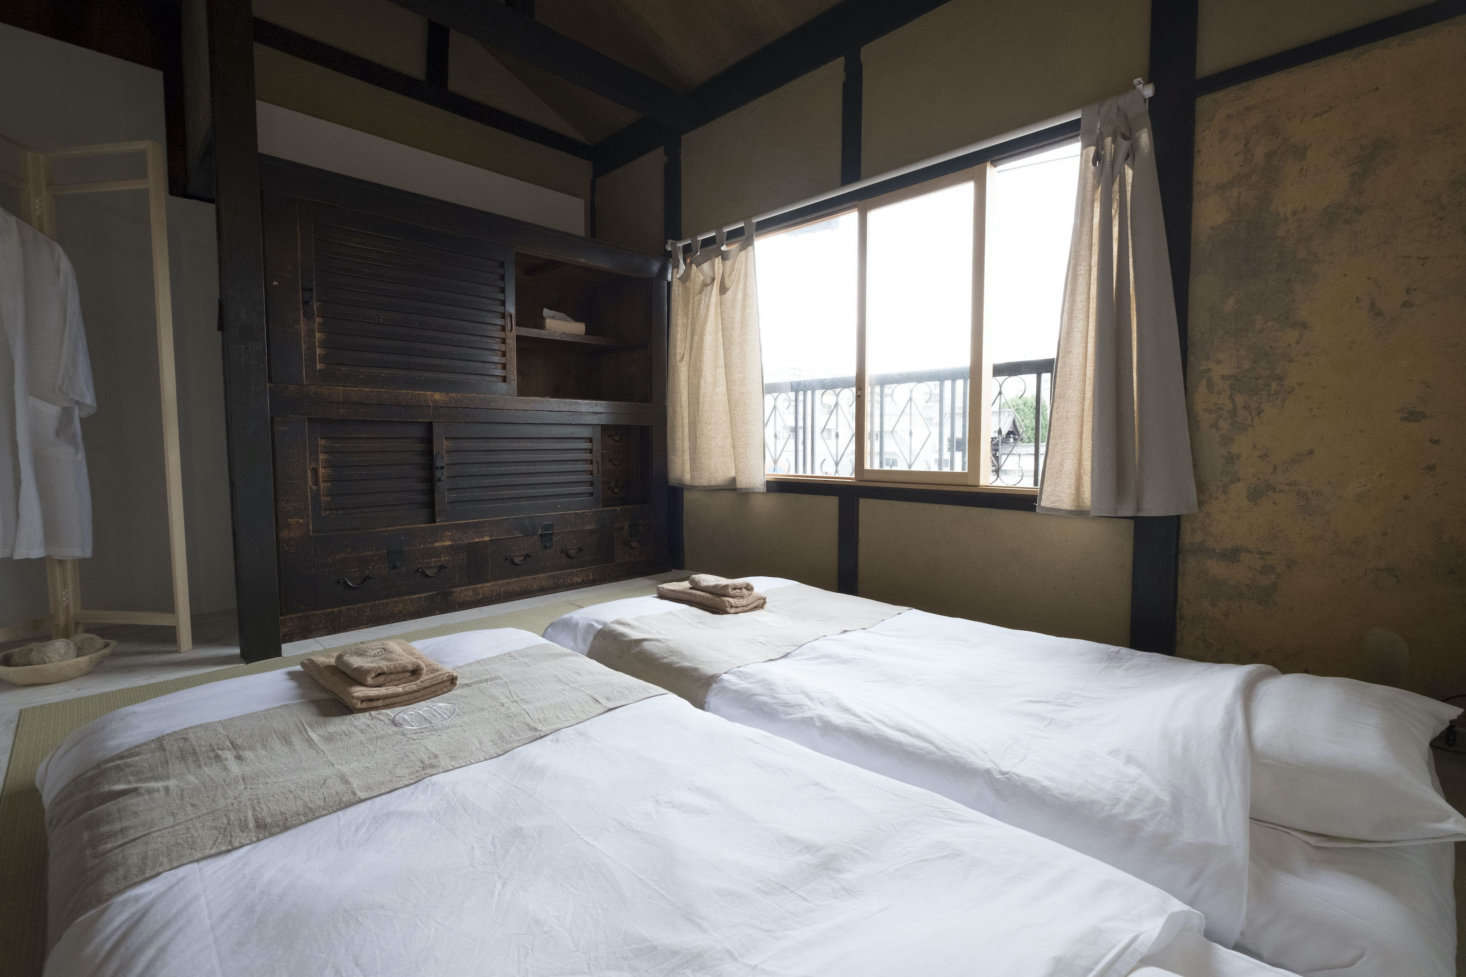 a day in khaki, a remodeled machiya guesthouse, kyoto. 12